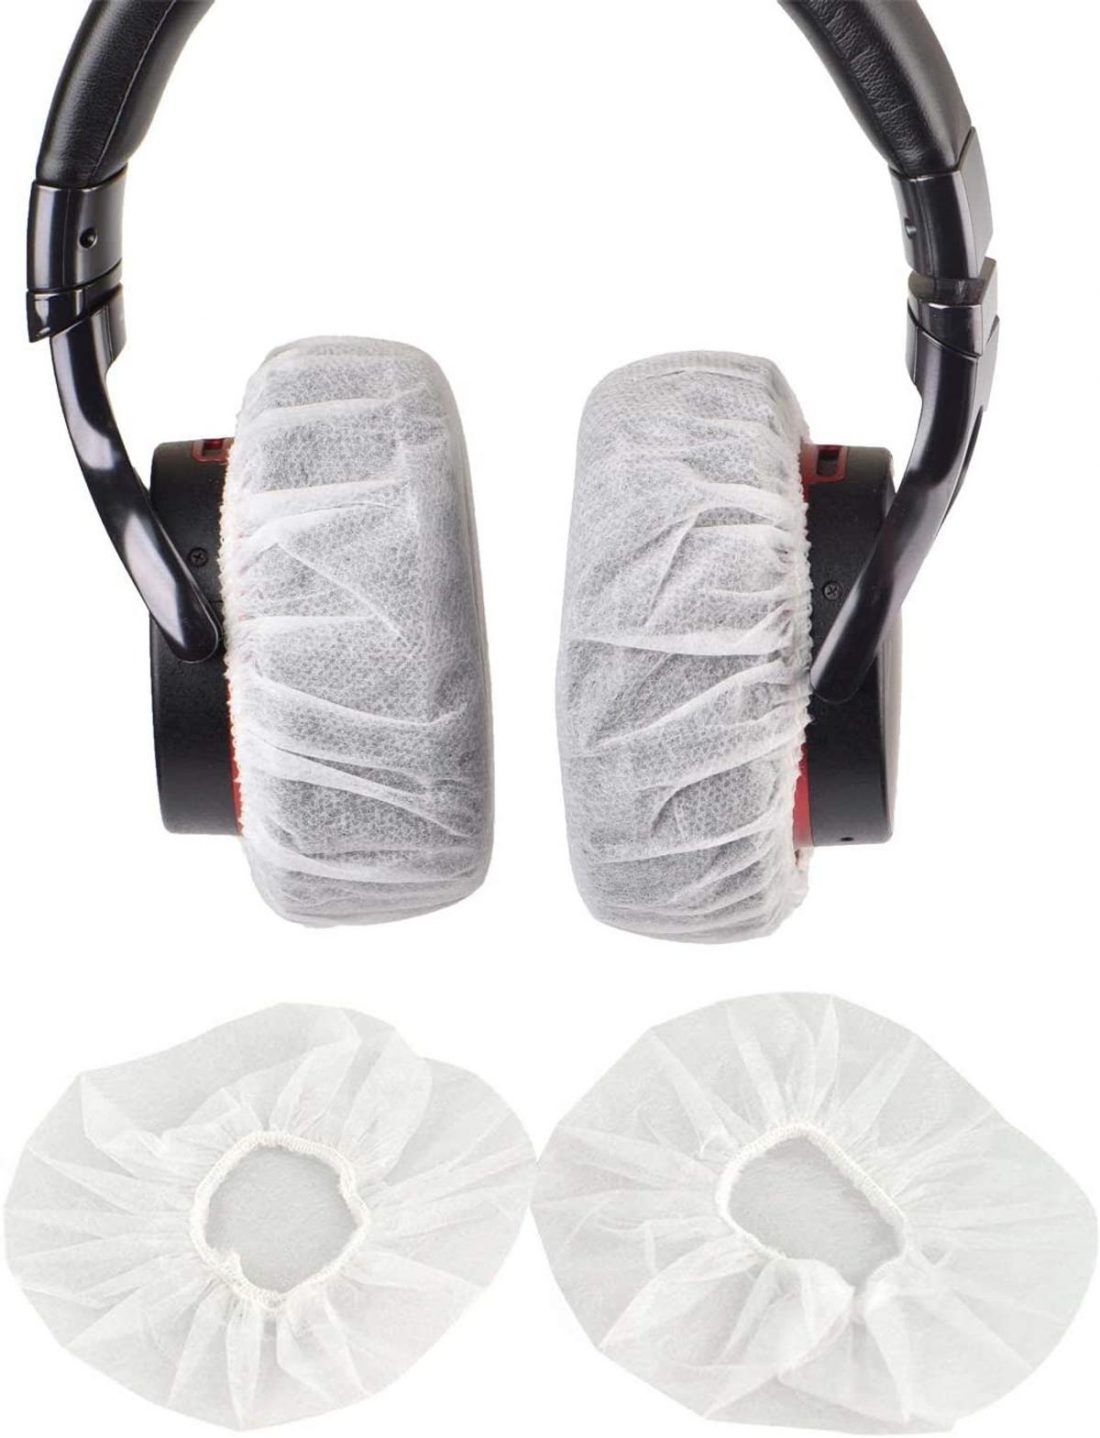 A set of headphone cushion covers (From: Amazon.com)